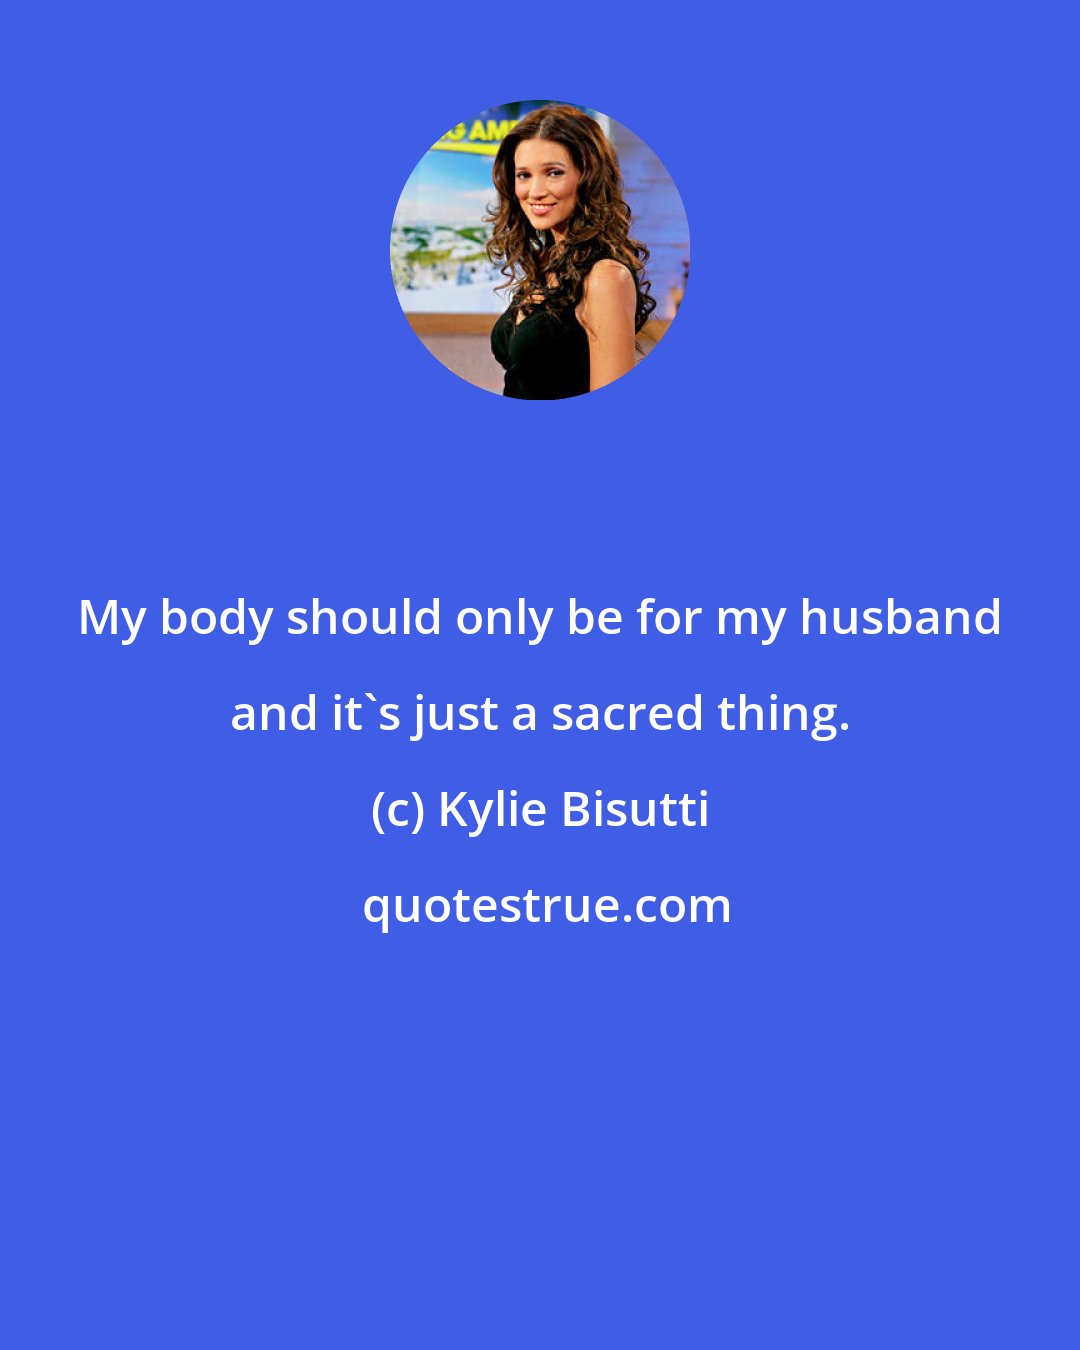 Kylie Bisutti: My body should only be for my husband and it's just a sacred thing.